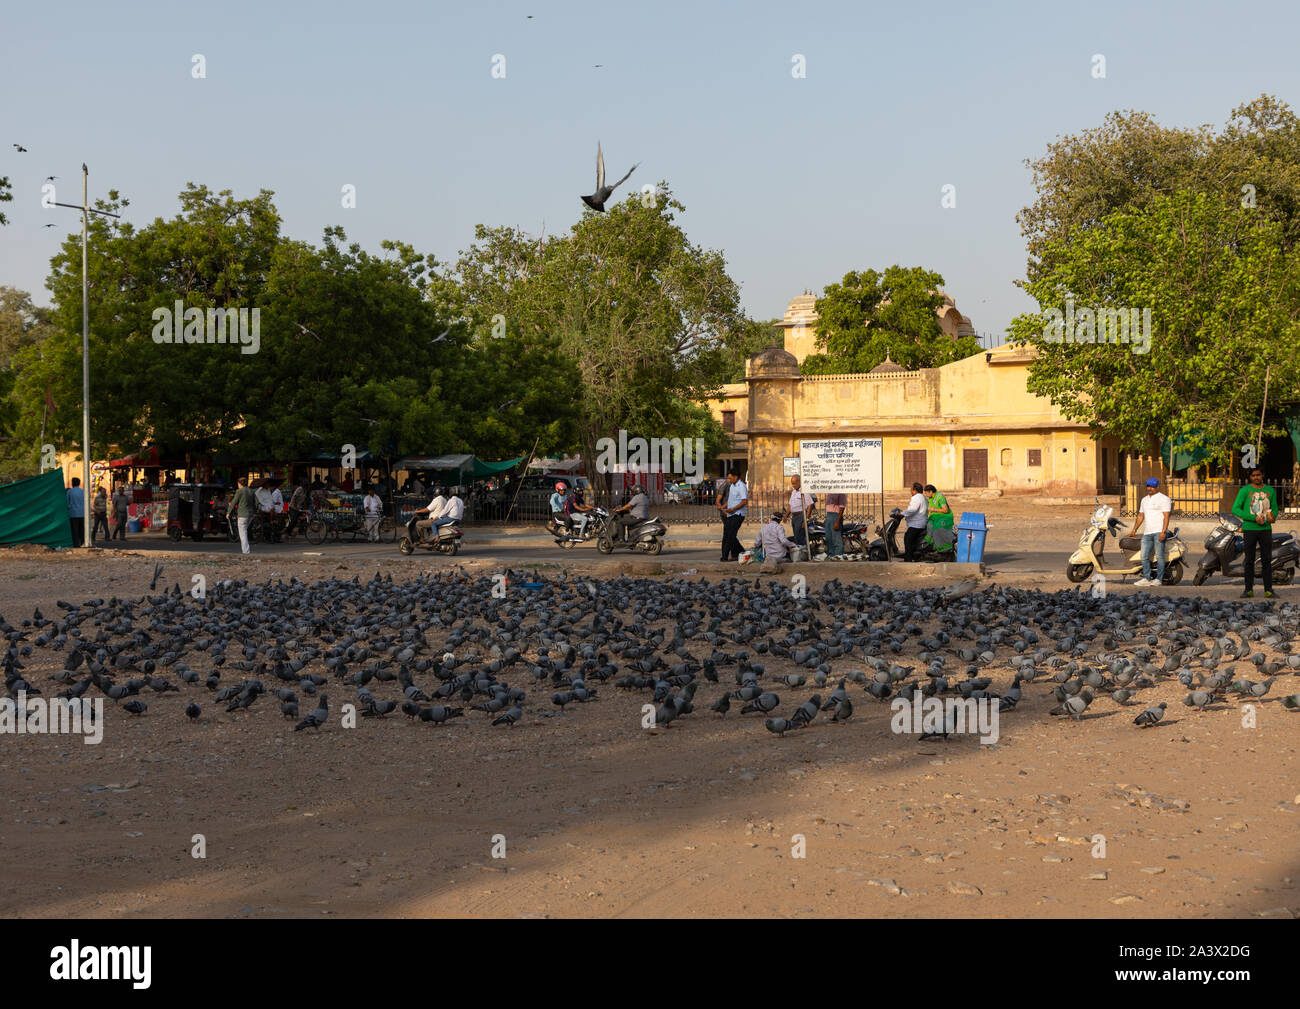 Pigeons on a town square, Rajasthan, Jaipur, India Stock Photo